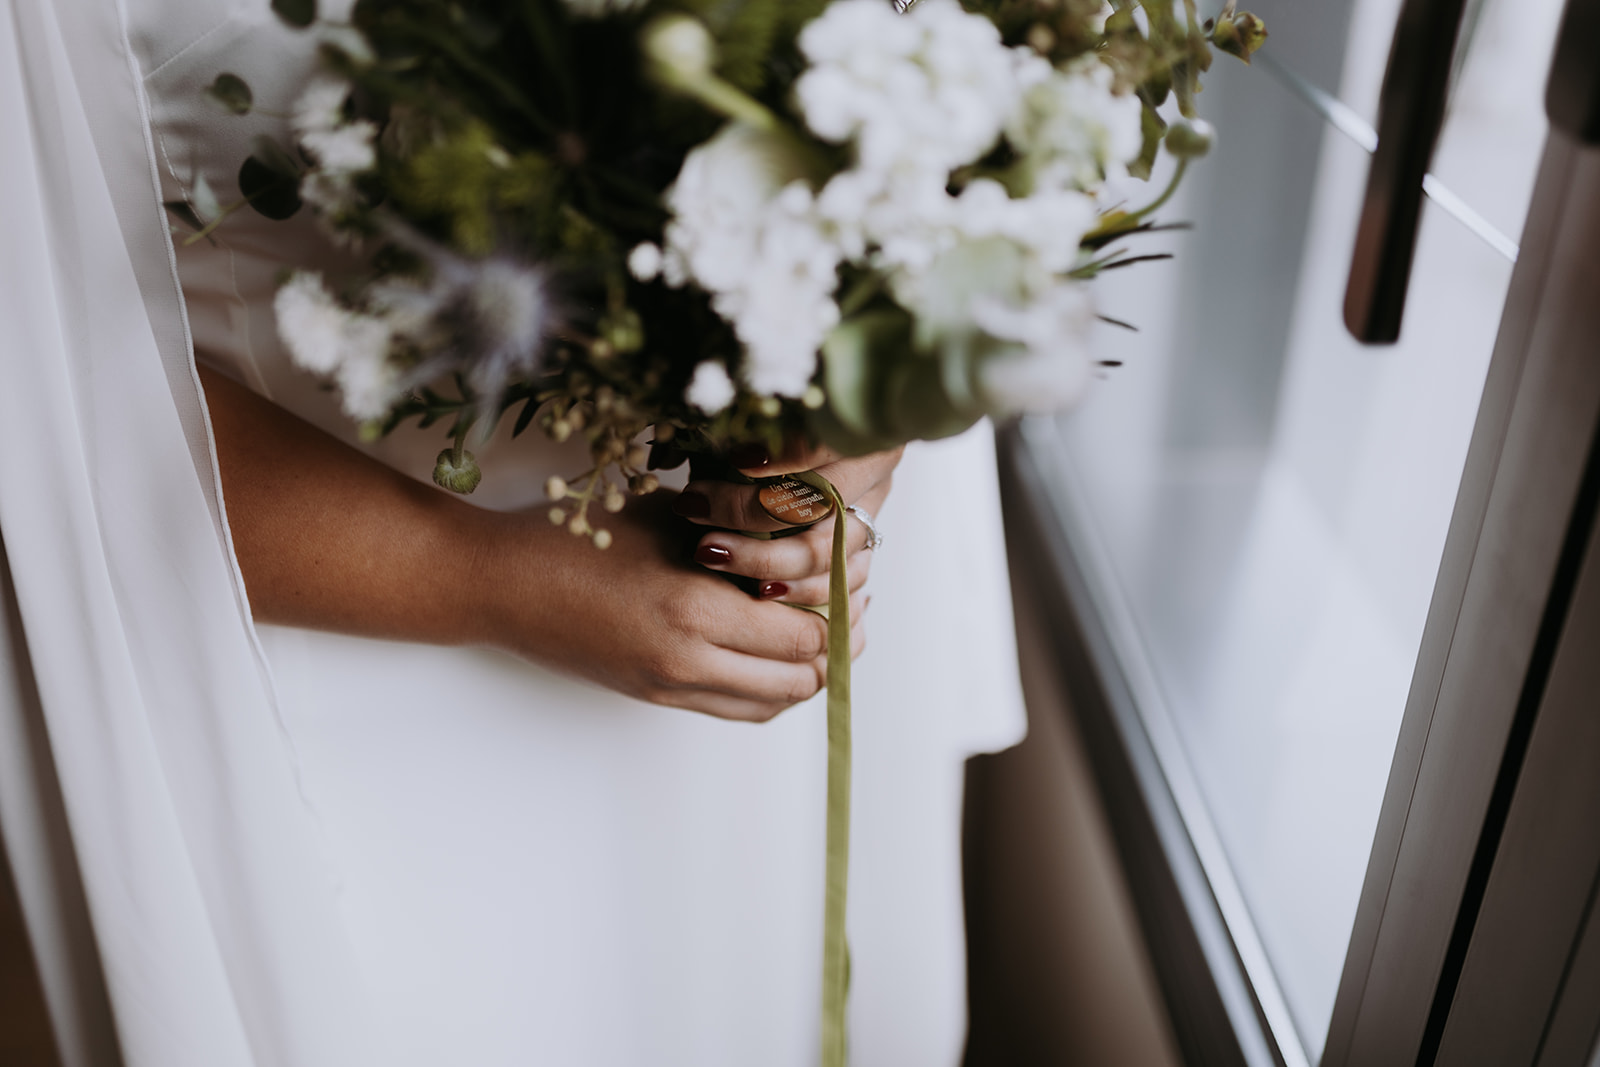 THE TREND OF CREATING A WEDDING WEBSITE: THE NEW WAY TO SHARE YOUR LOVE WITH THE WORLD